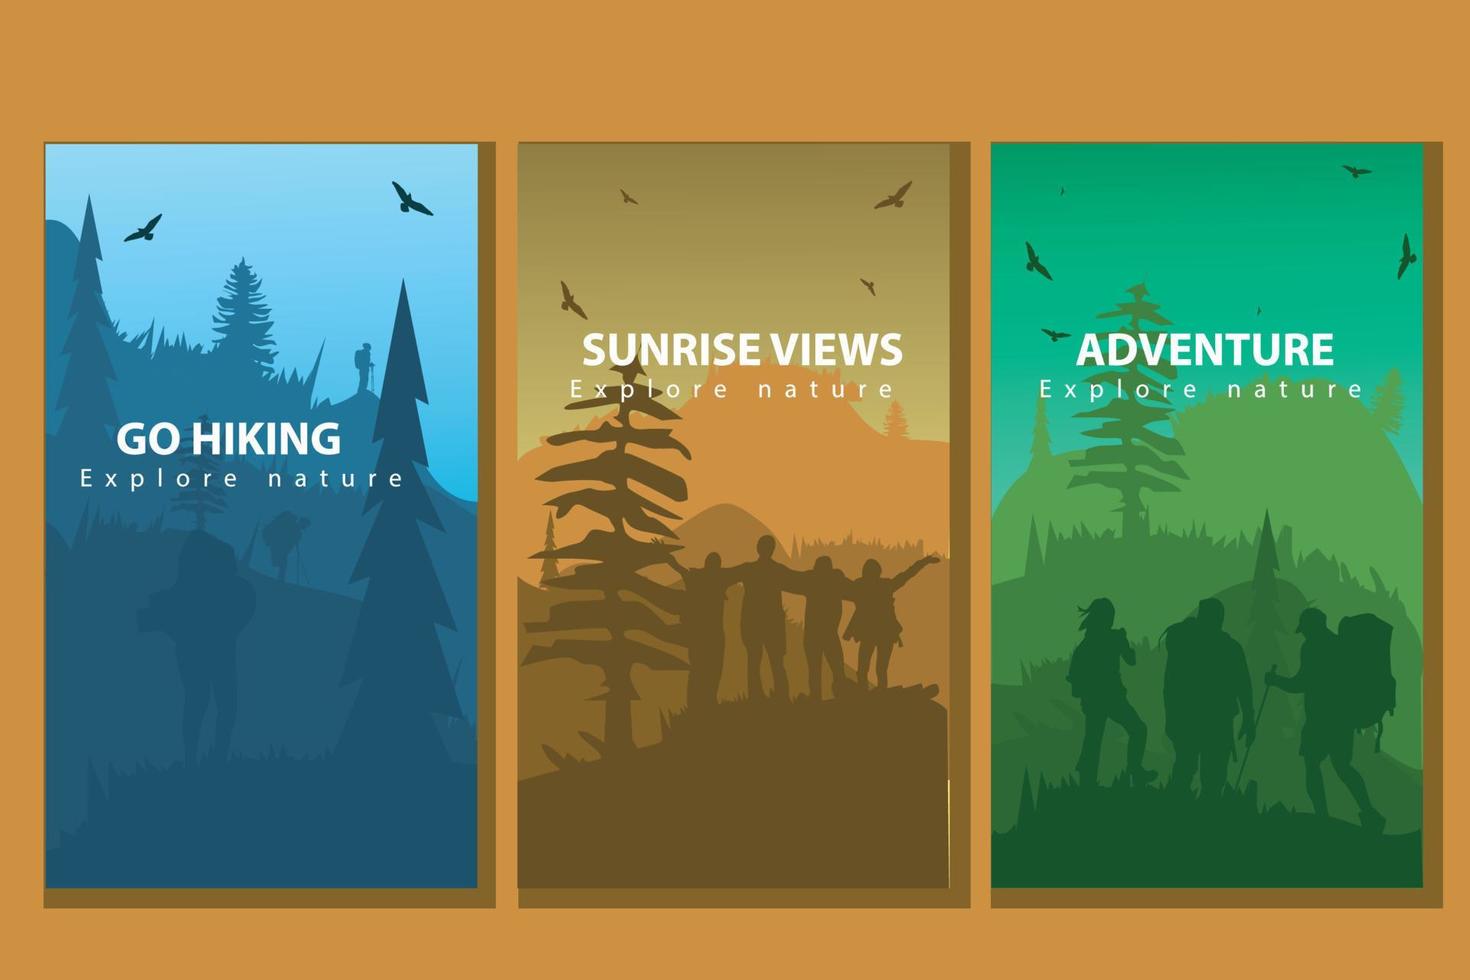 Vector brochure cards set. Travel concept of discovering, exploring and observing nature. Hiking. Adventure tourism. Flat design template of flyer, magazine, book cover, banner, invitation, poster.